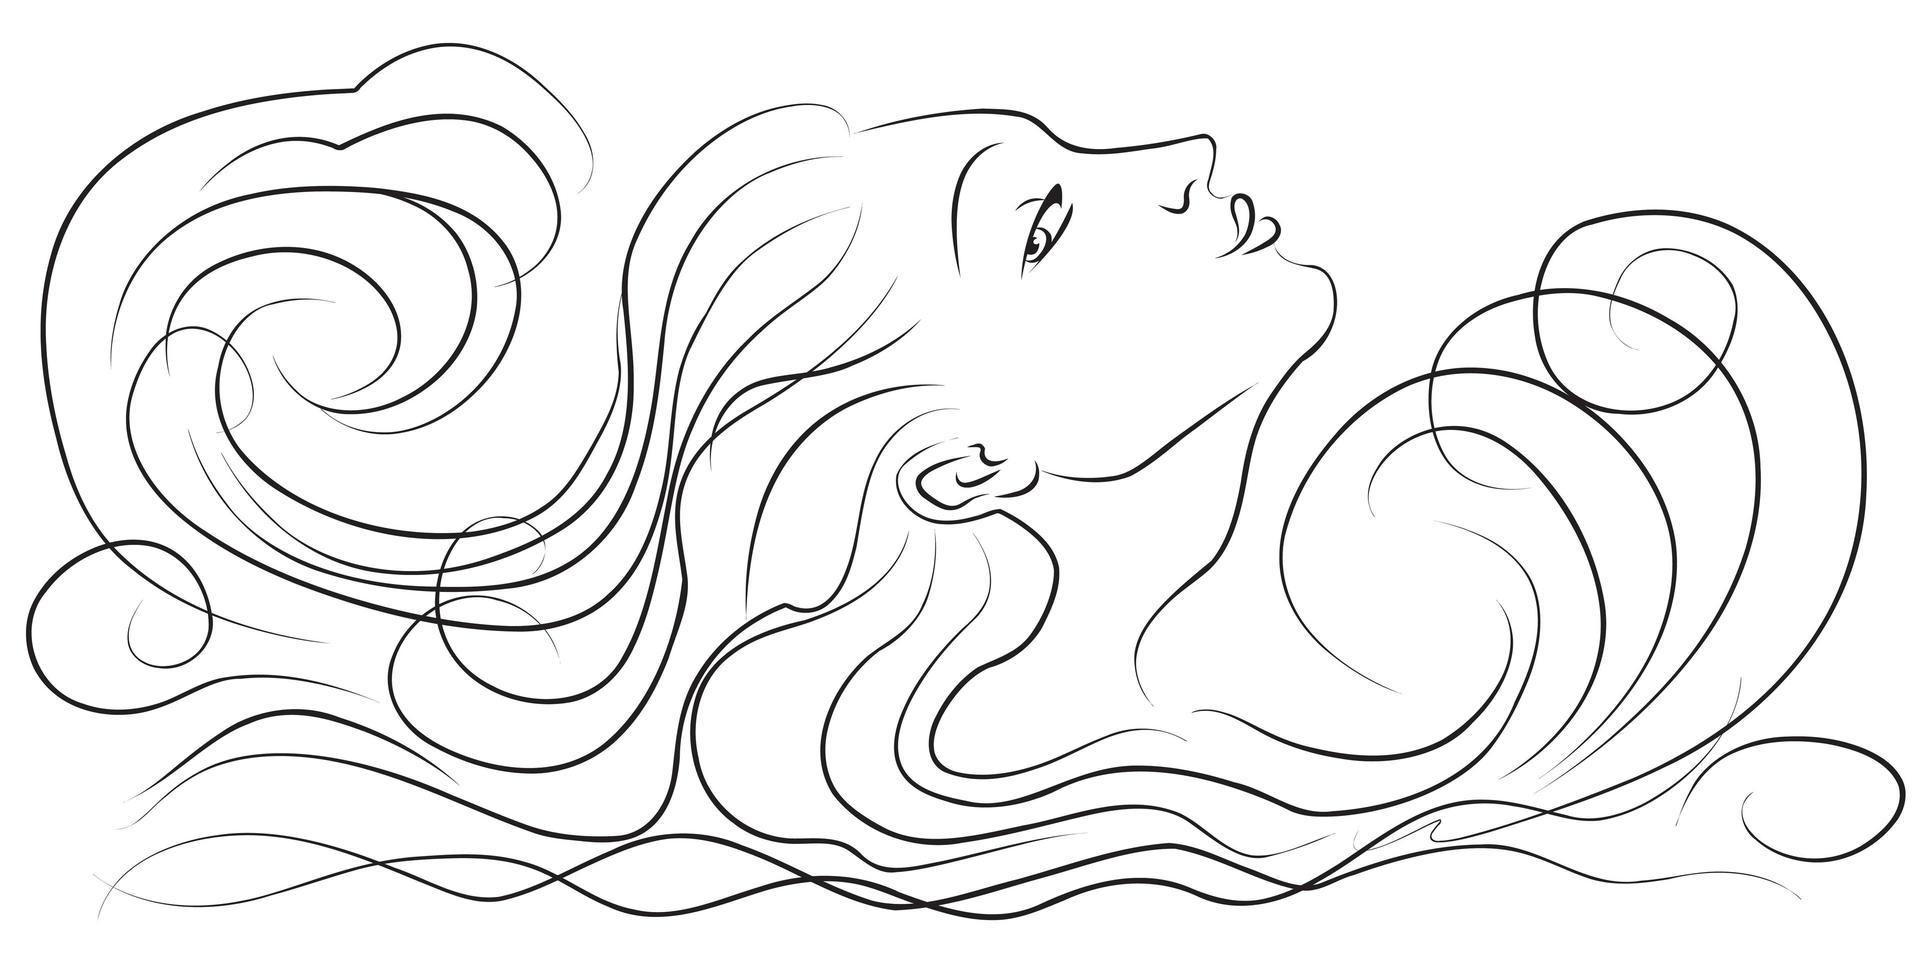 Girl in the waves vector